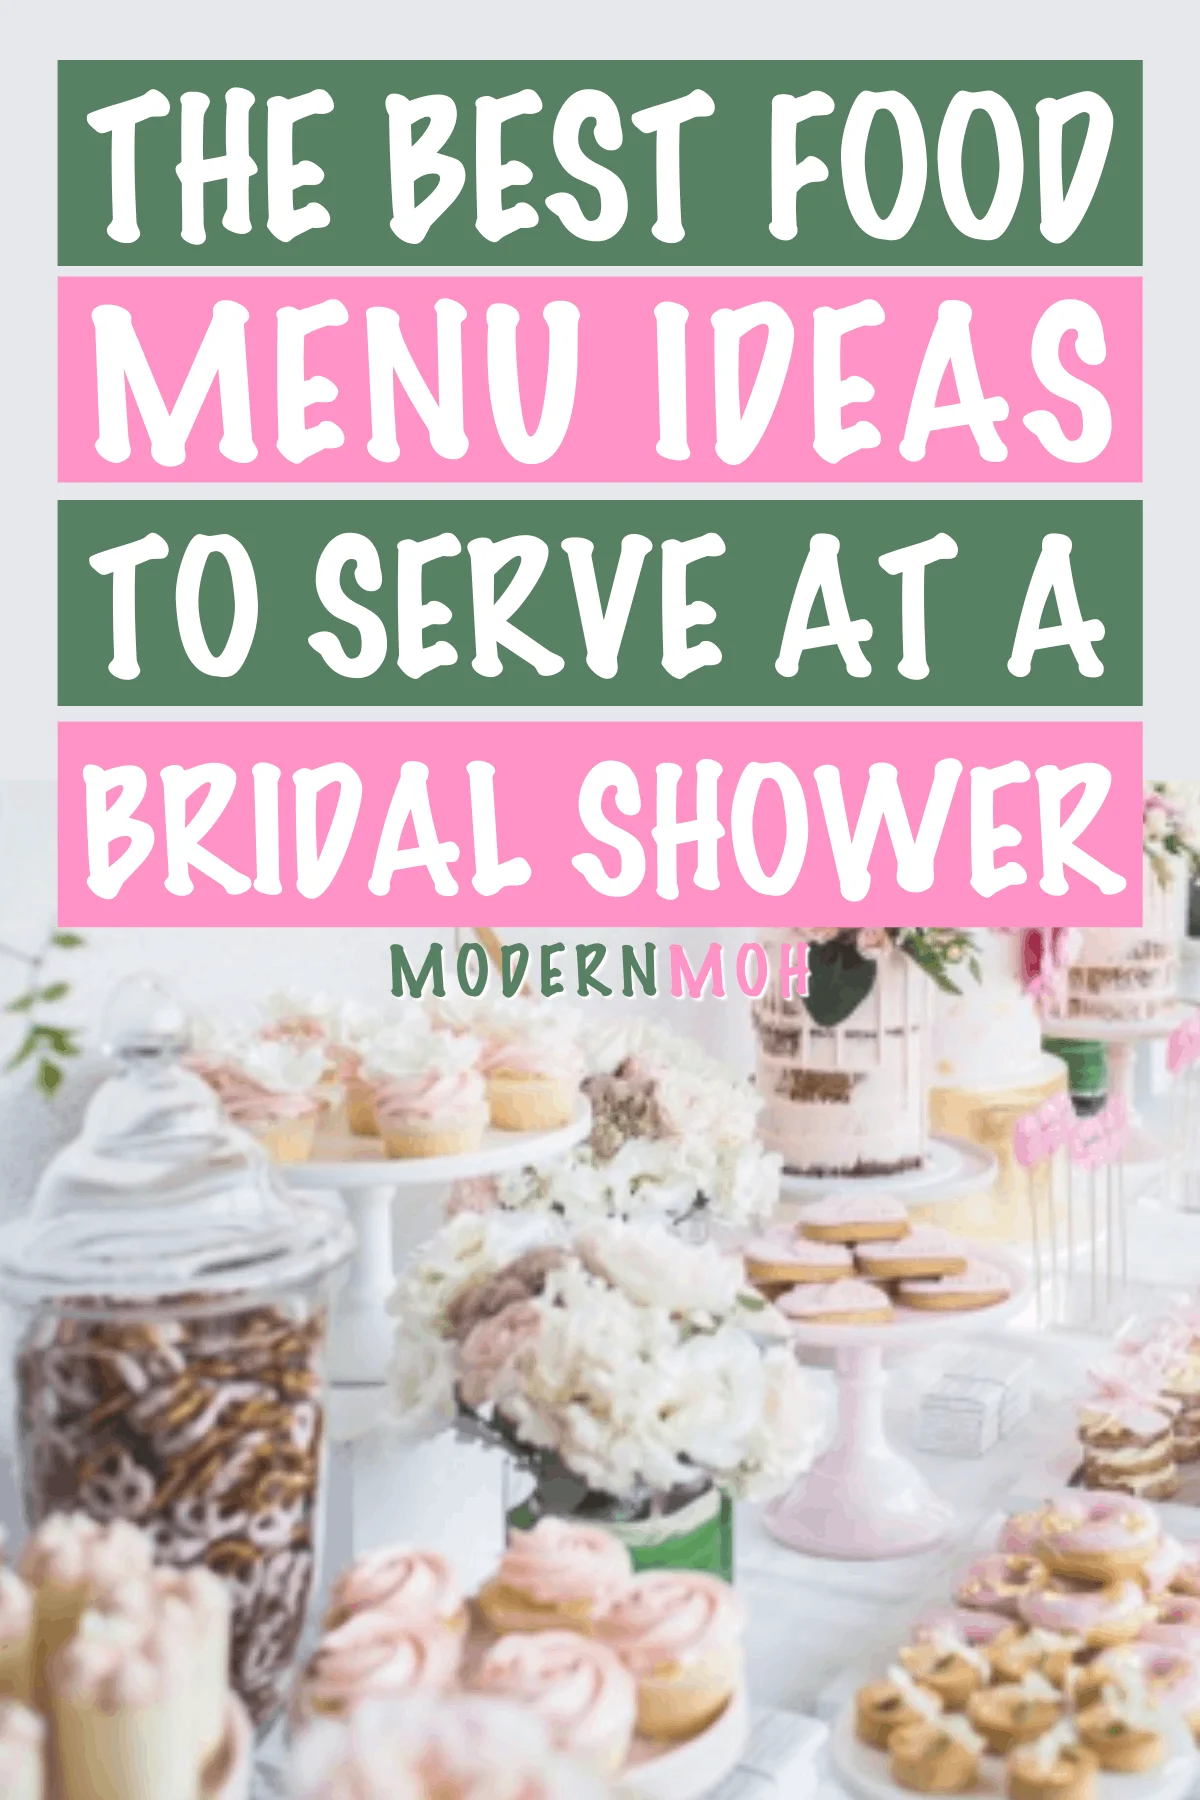 Bridal Shower Food Menu: A Basic Breakdown of Must-Have Eats and Treats